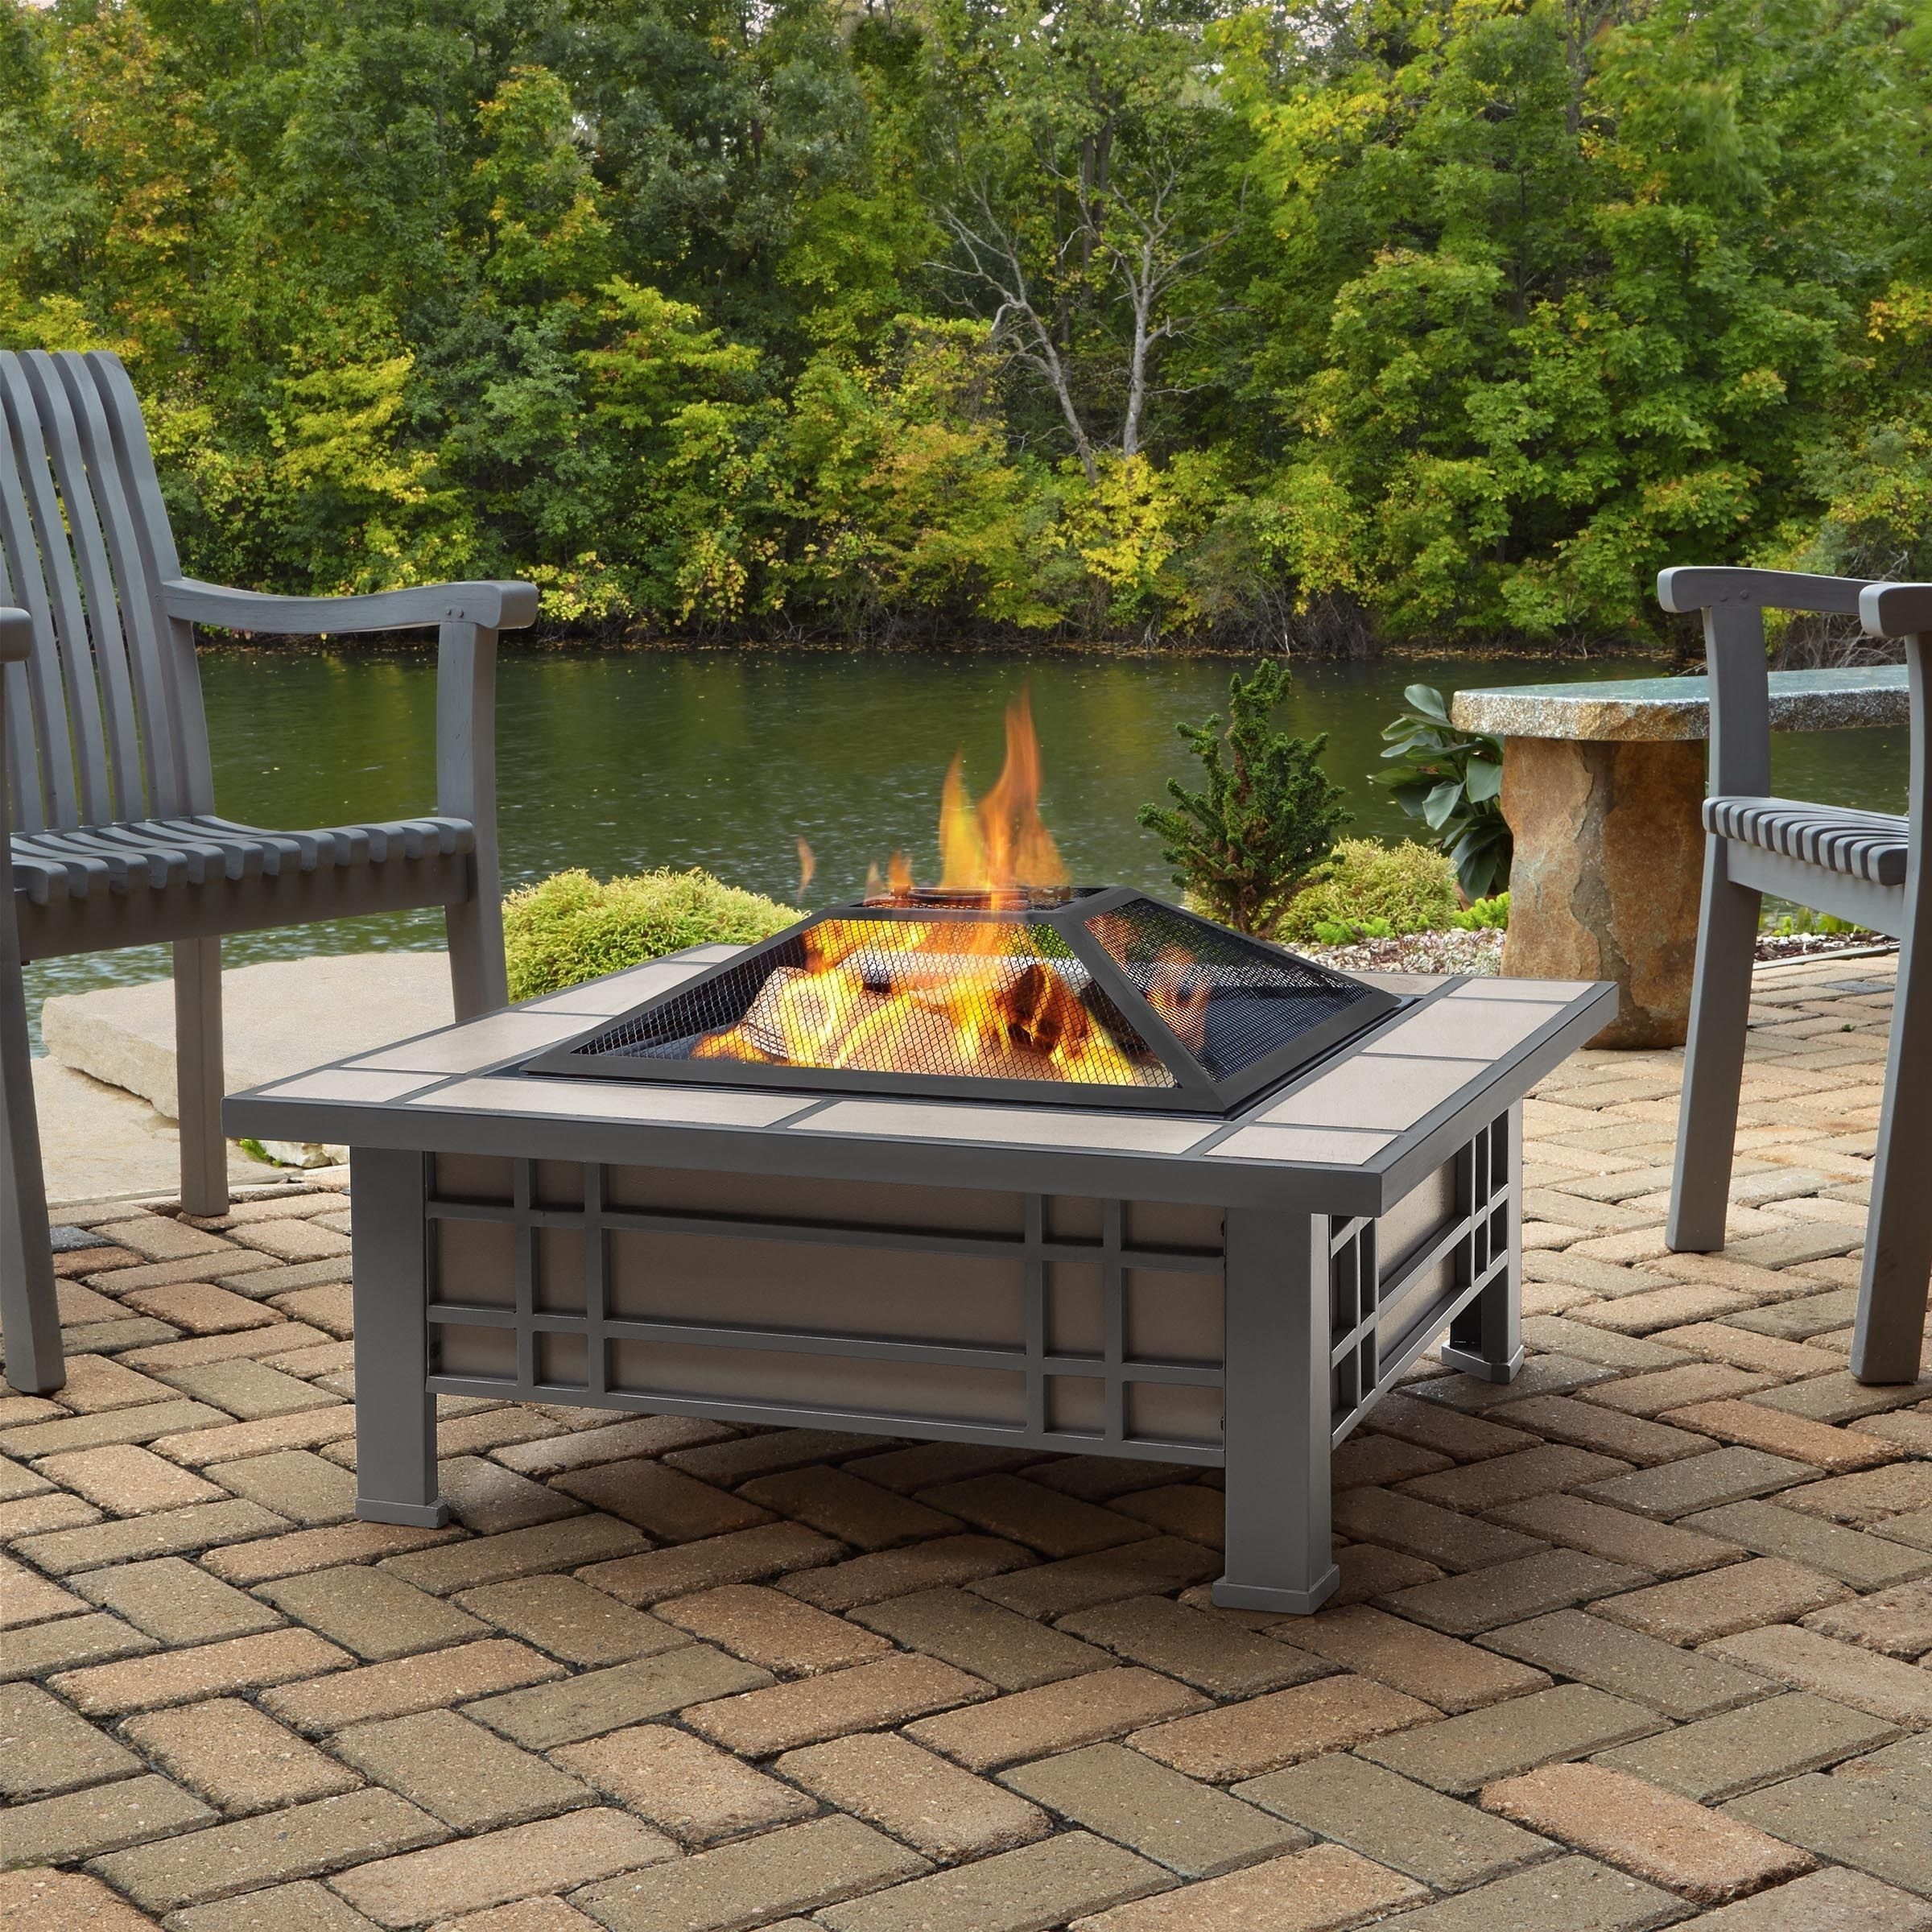 Wood Burning Fire Pit Table Visualhunt, Real Flame Alderwood Fire Pit